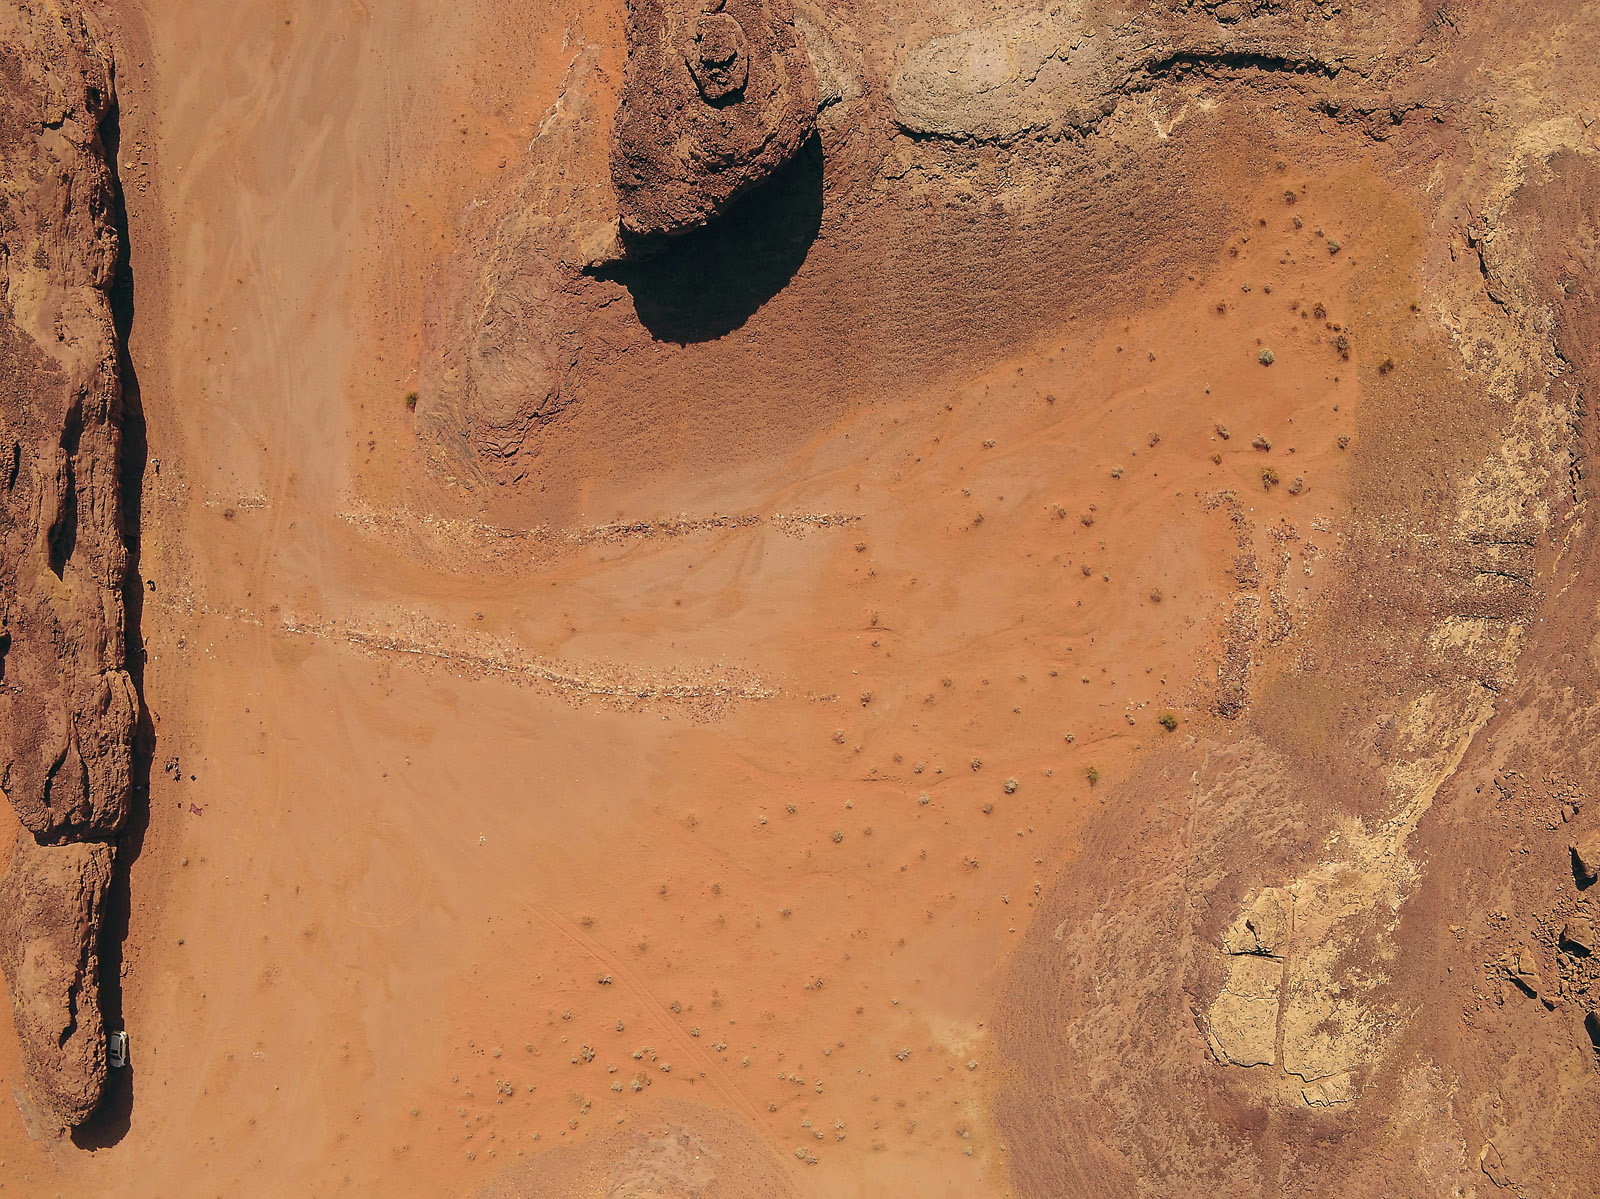 Often faint in against sand and rocky ground, a mustatil is often clearly visible from above, and the Aerial Archaeology in the Kingdom of Saudi Arabia project has charted more than 1,000 of them, including this one that measures 140 by 22 meters.